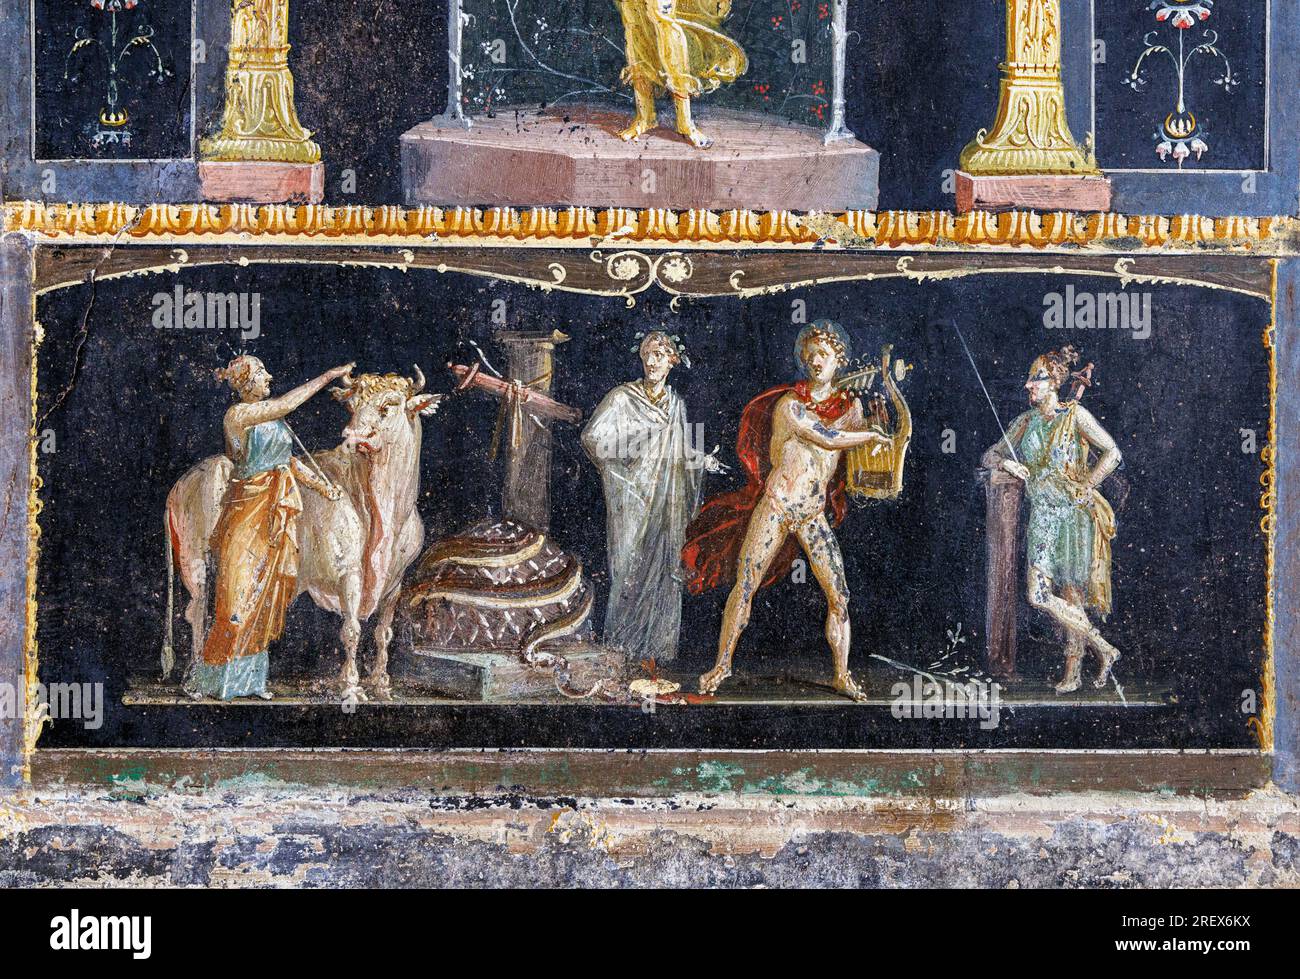 Pompeii Archaeological Site, Campania, Italy.  Fresco illustrating the story from Greek mythology of Apollo and Diana after the killing of the Python. Stock Photo